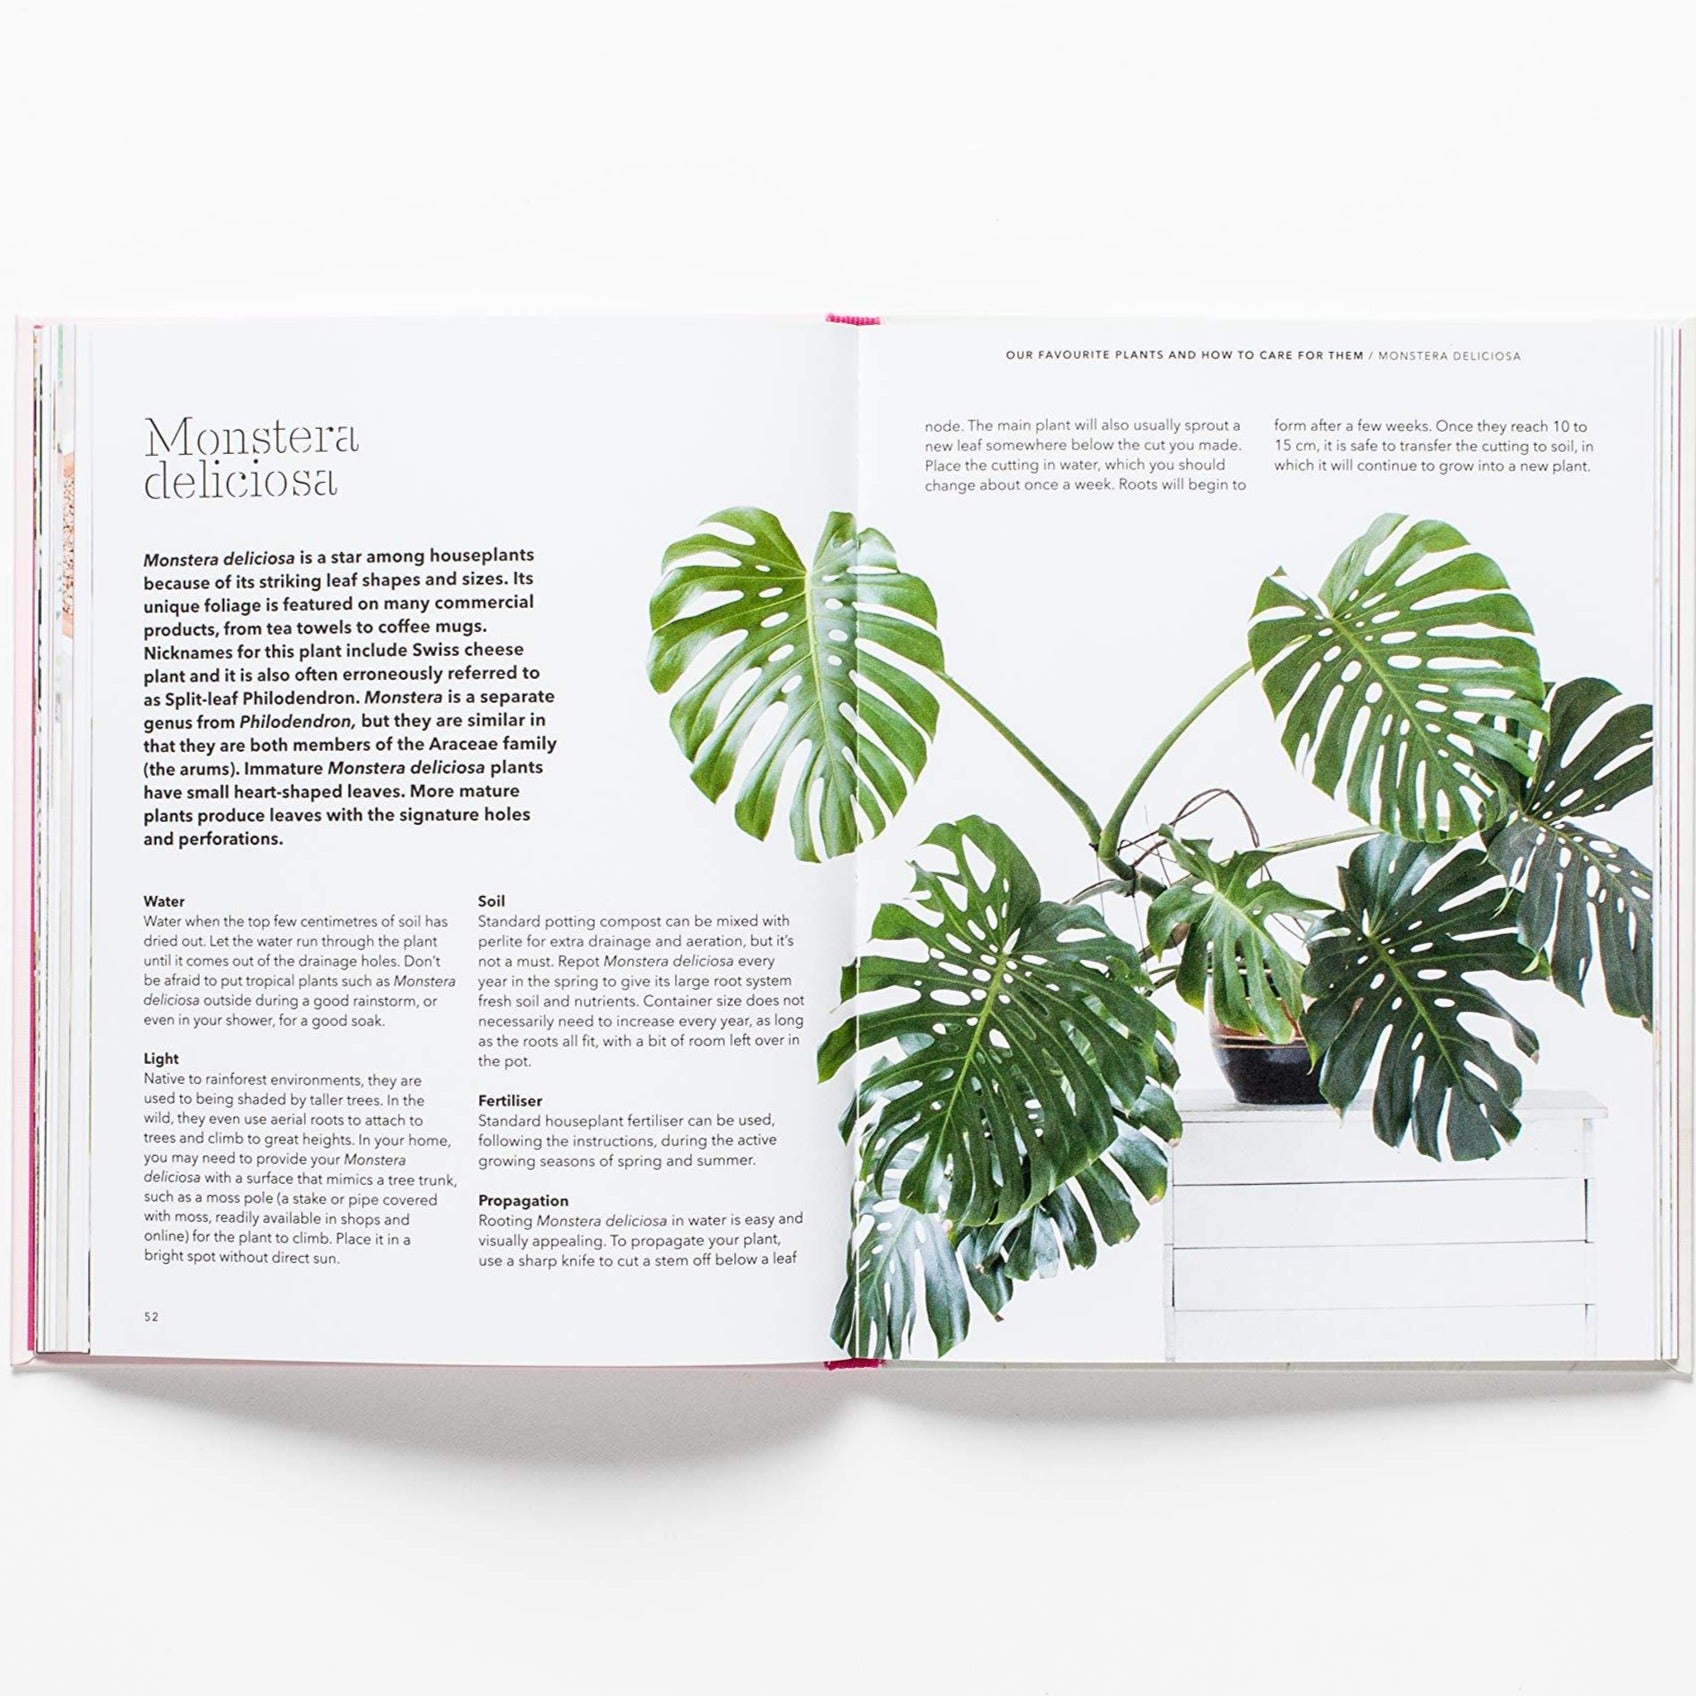 Monstera deliciosa is a star among houseplants because of its striking leaf shapes and sizes.